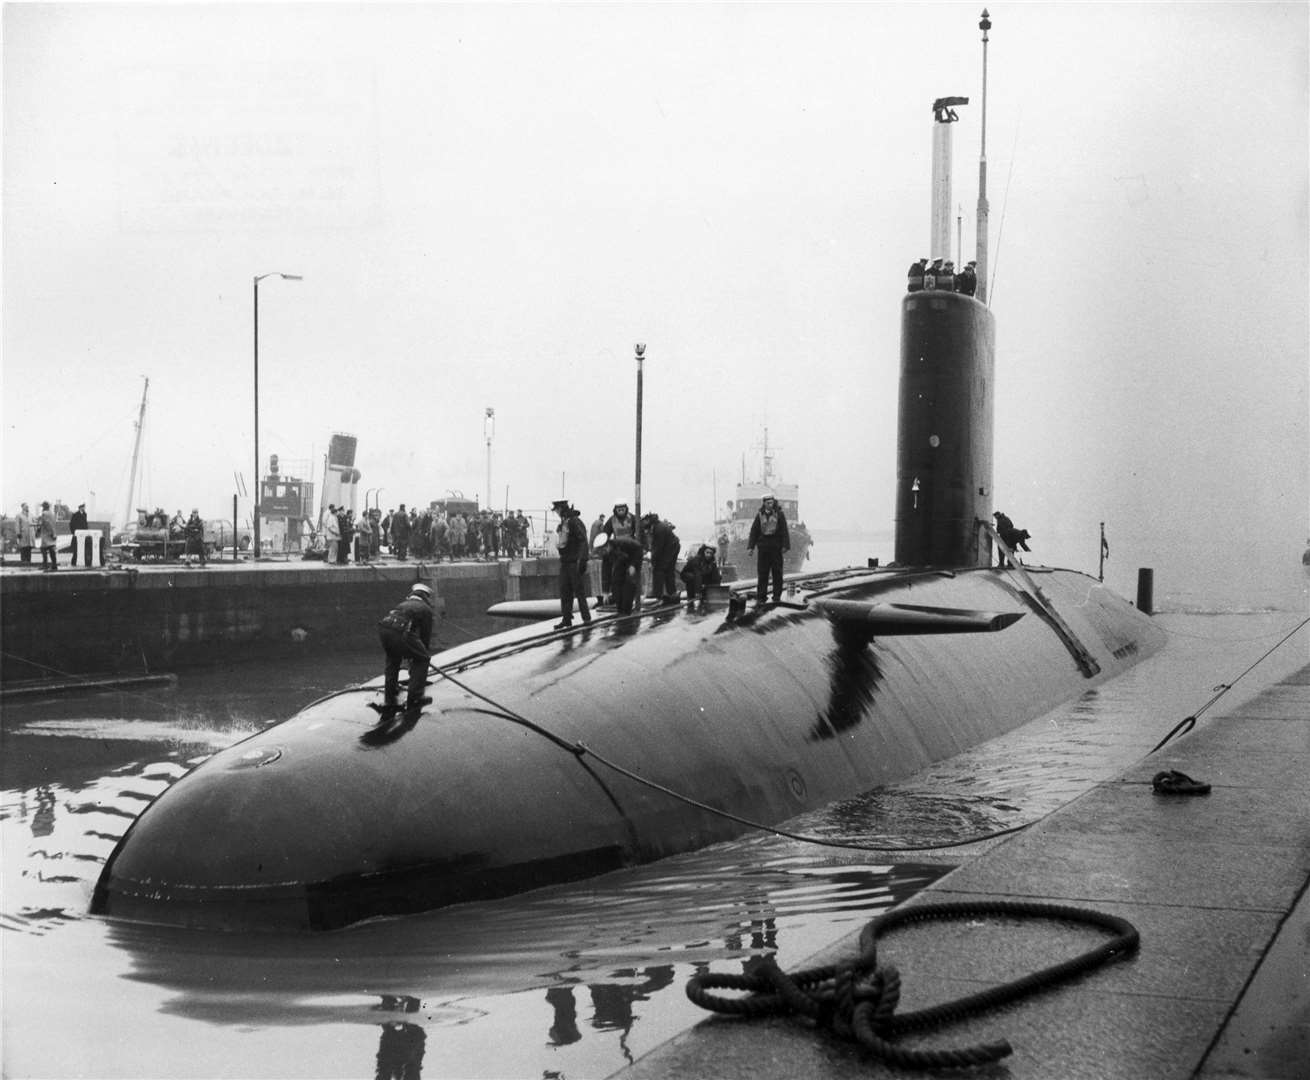 Nigel worked on nuclear submarines like this one. Picture: Chatham Historic Dockyard Trust